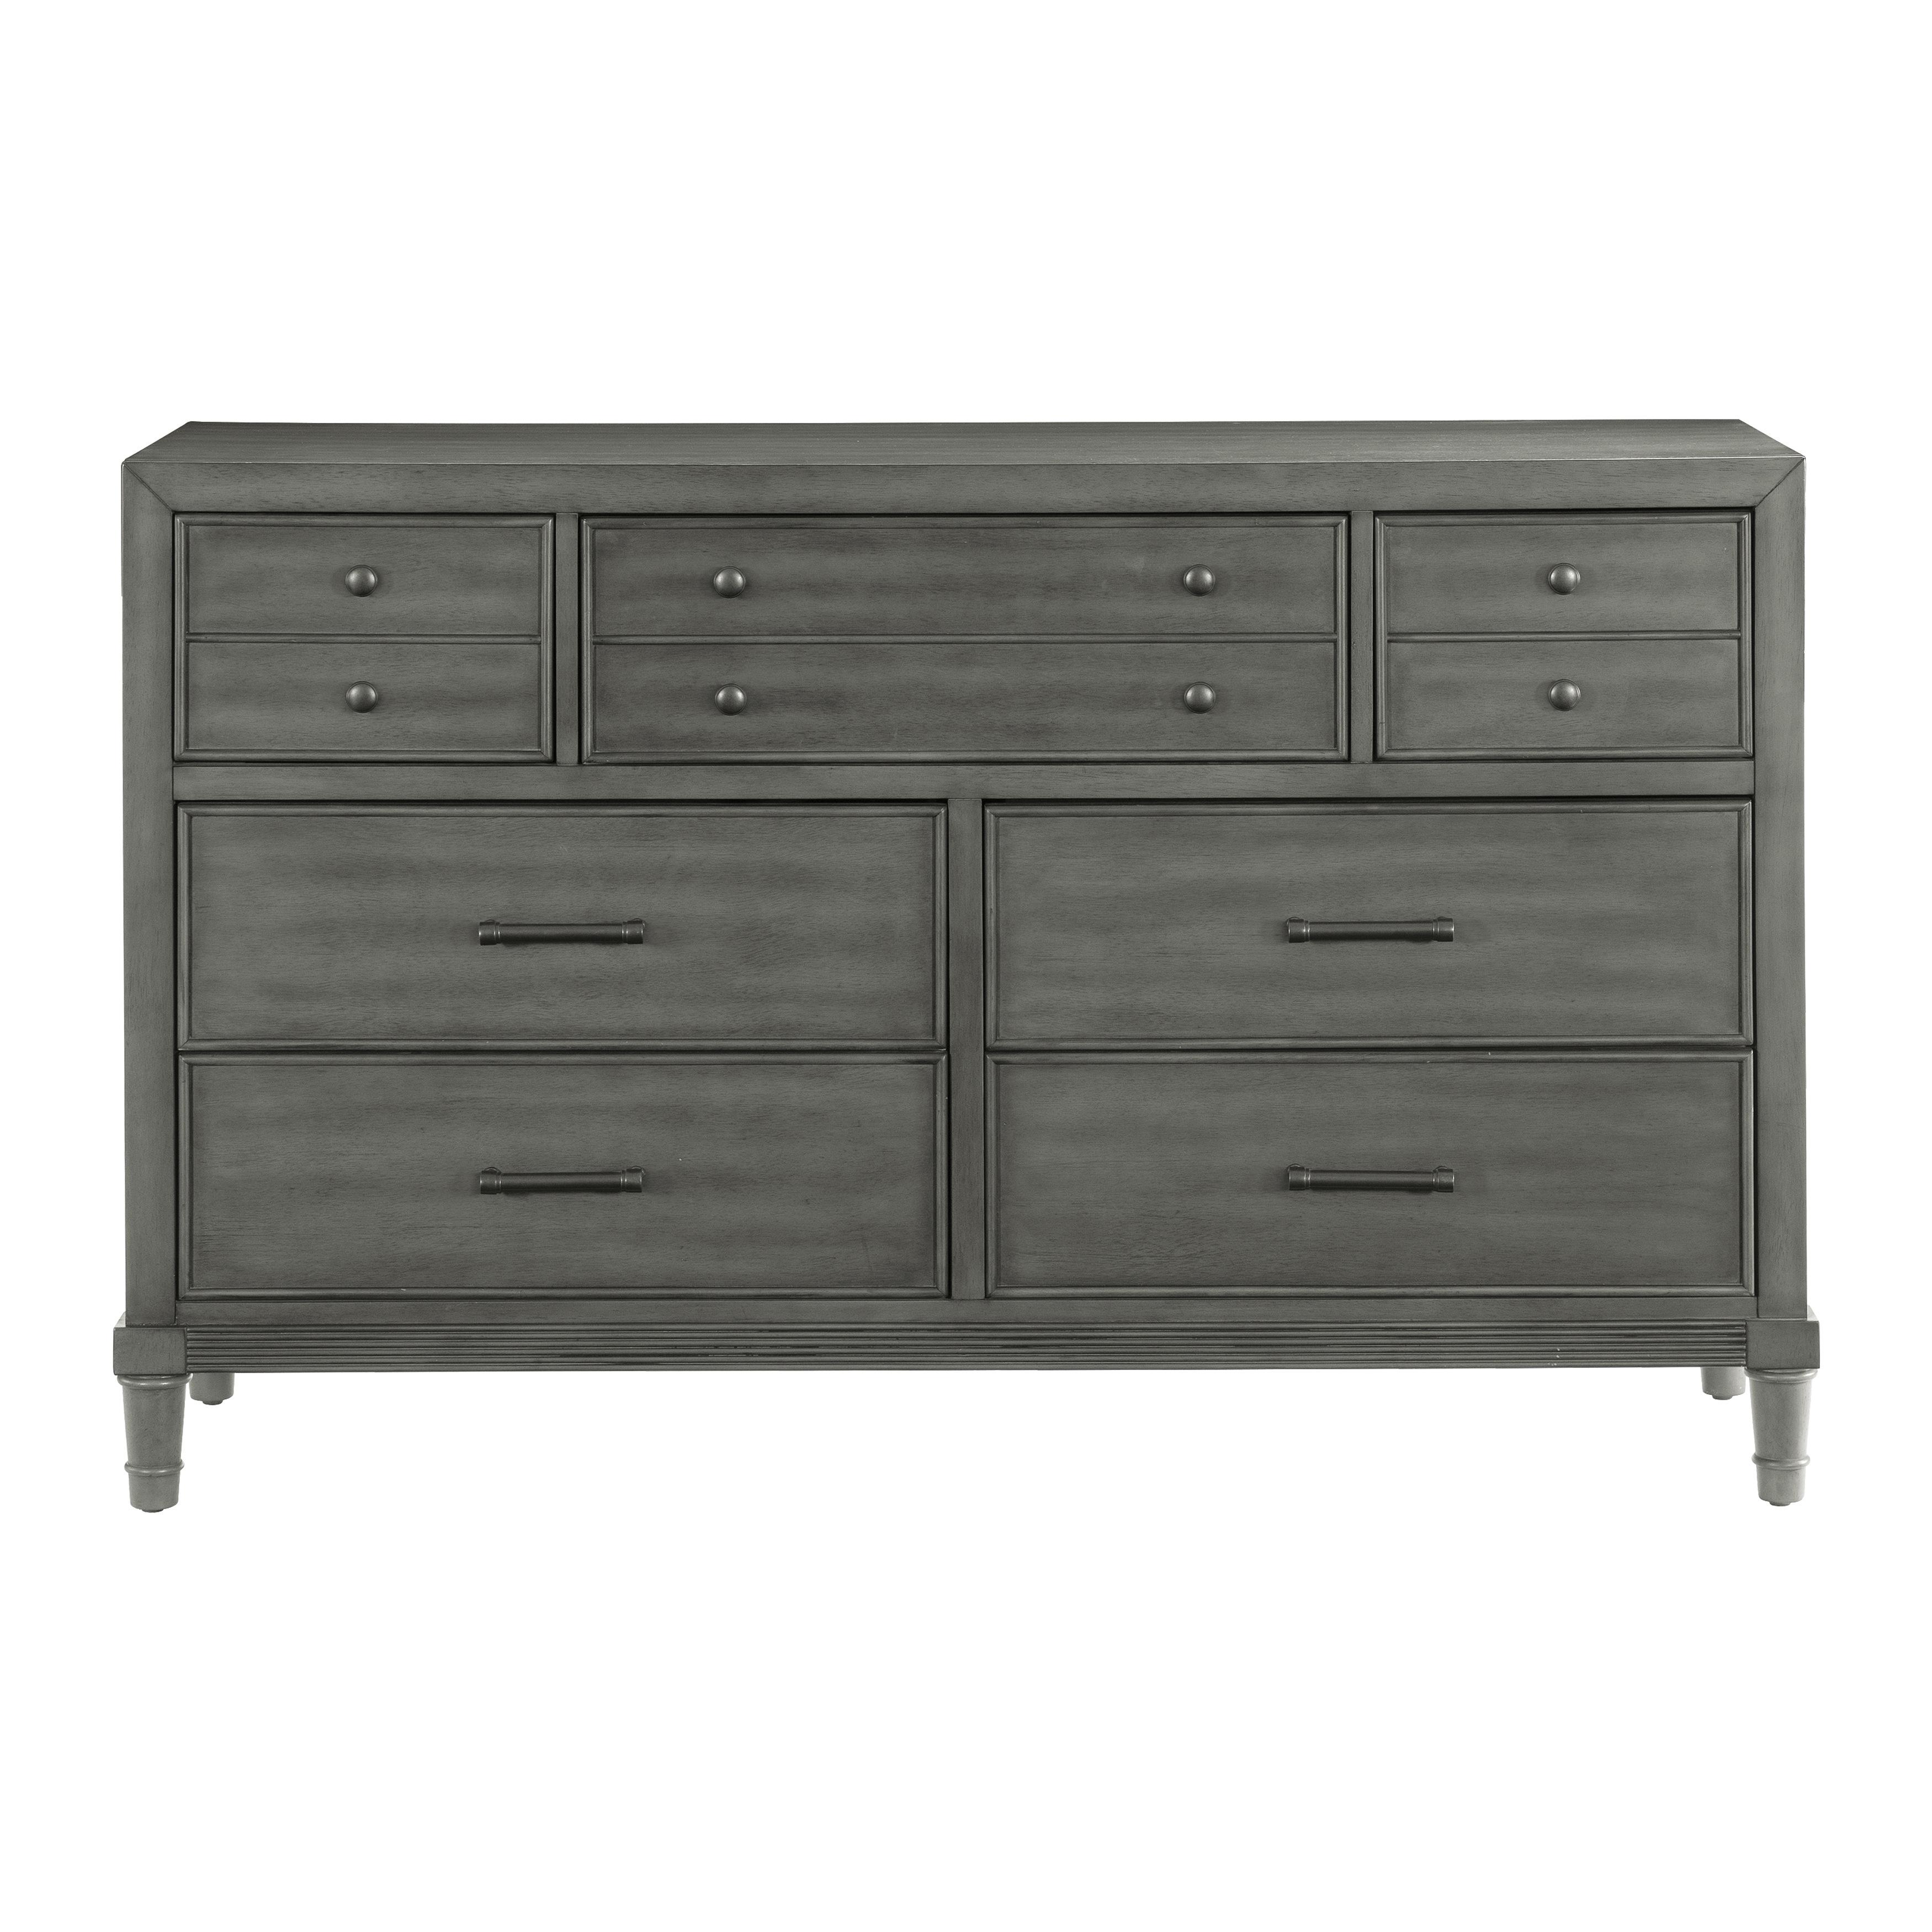 Transitional Dresser 1573-5 Wittenberry 1573-5 in Gray 